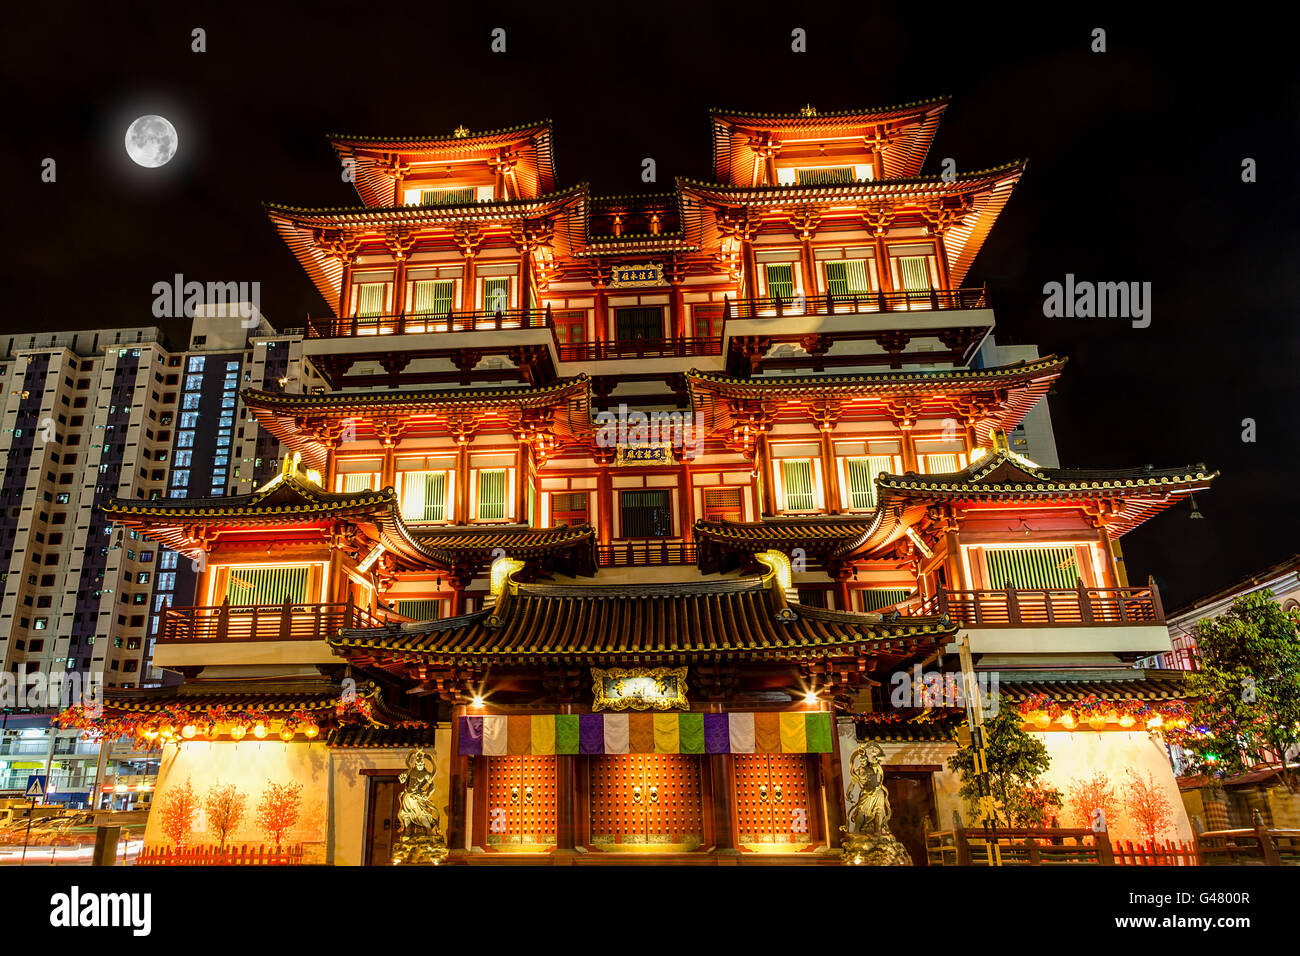 Full moon over the Buddha Tooth Relic Temple in Singapore Chinatown. Stock Photo